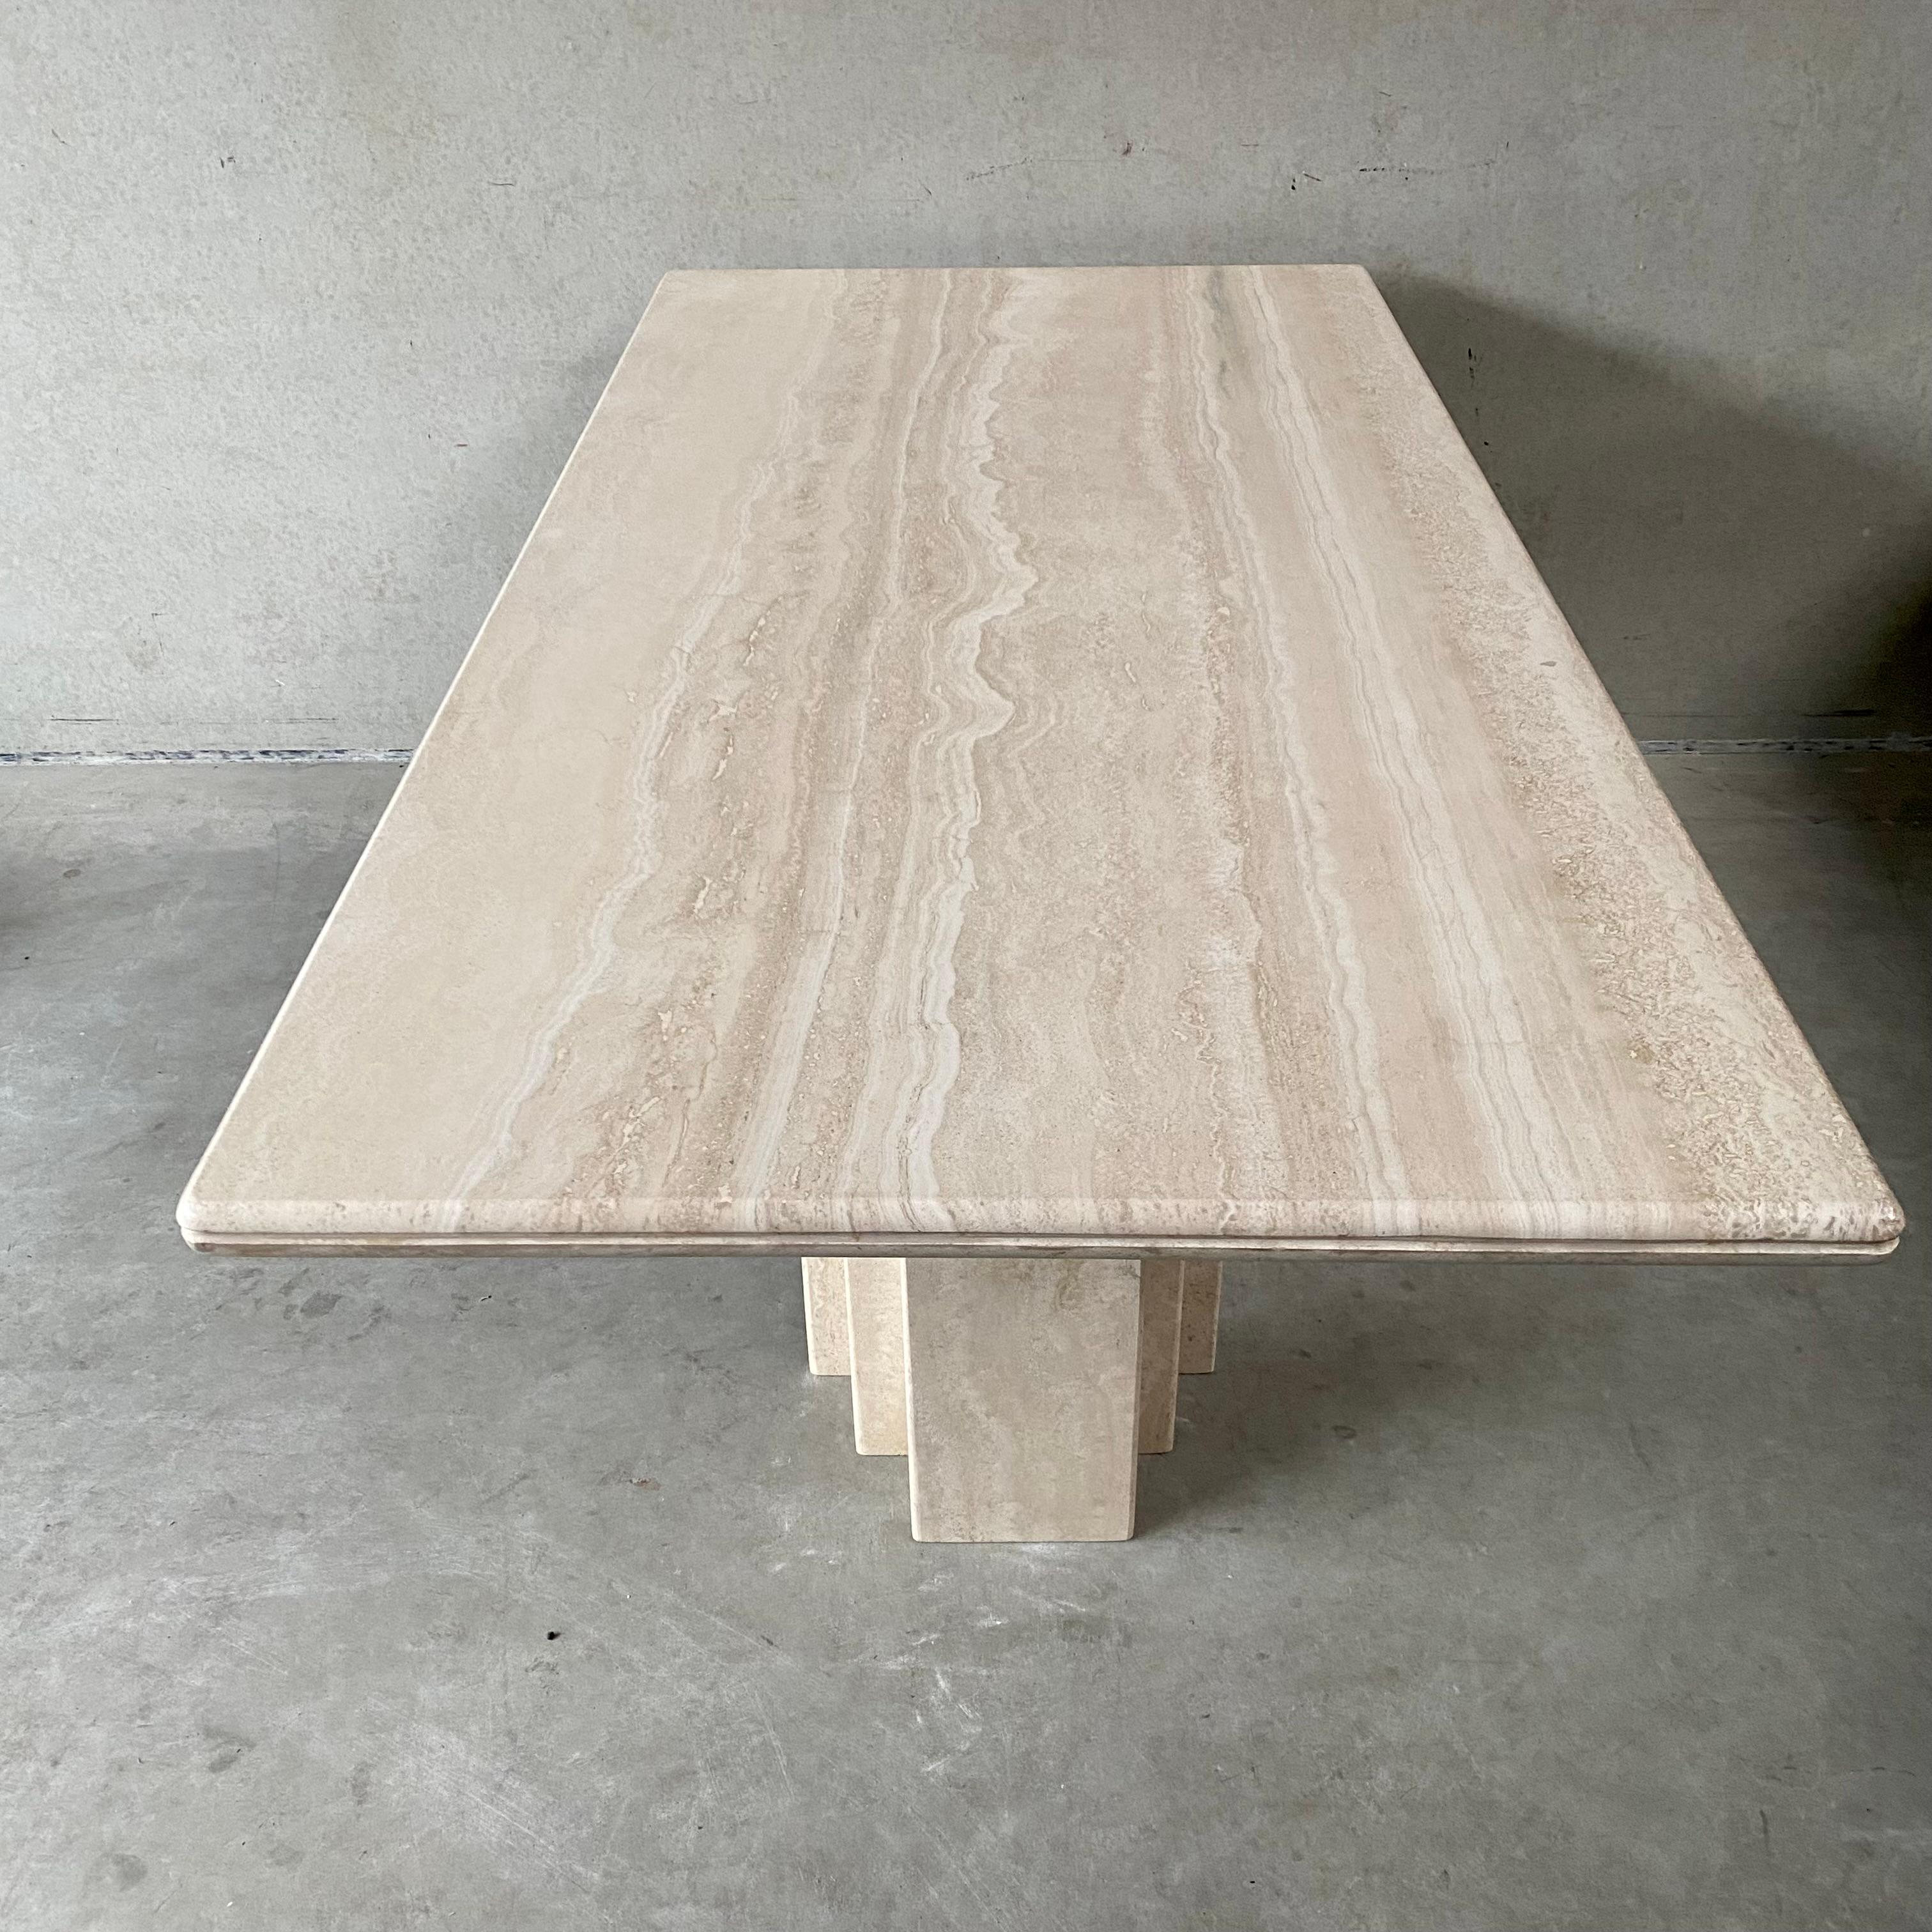 Introducing our stunning rectangular Travertine dining table, a true masterpiece of Italian design from 1980. Crafted with exquisite attention to detail, this table features a luxurious 4 cm thick travertine top that is sure to make a statement in